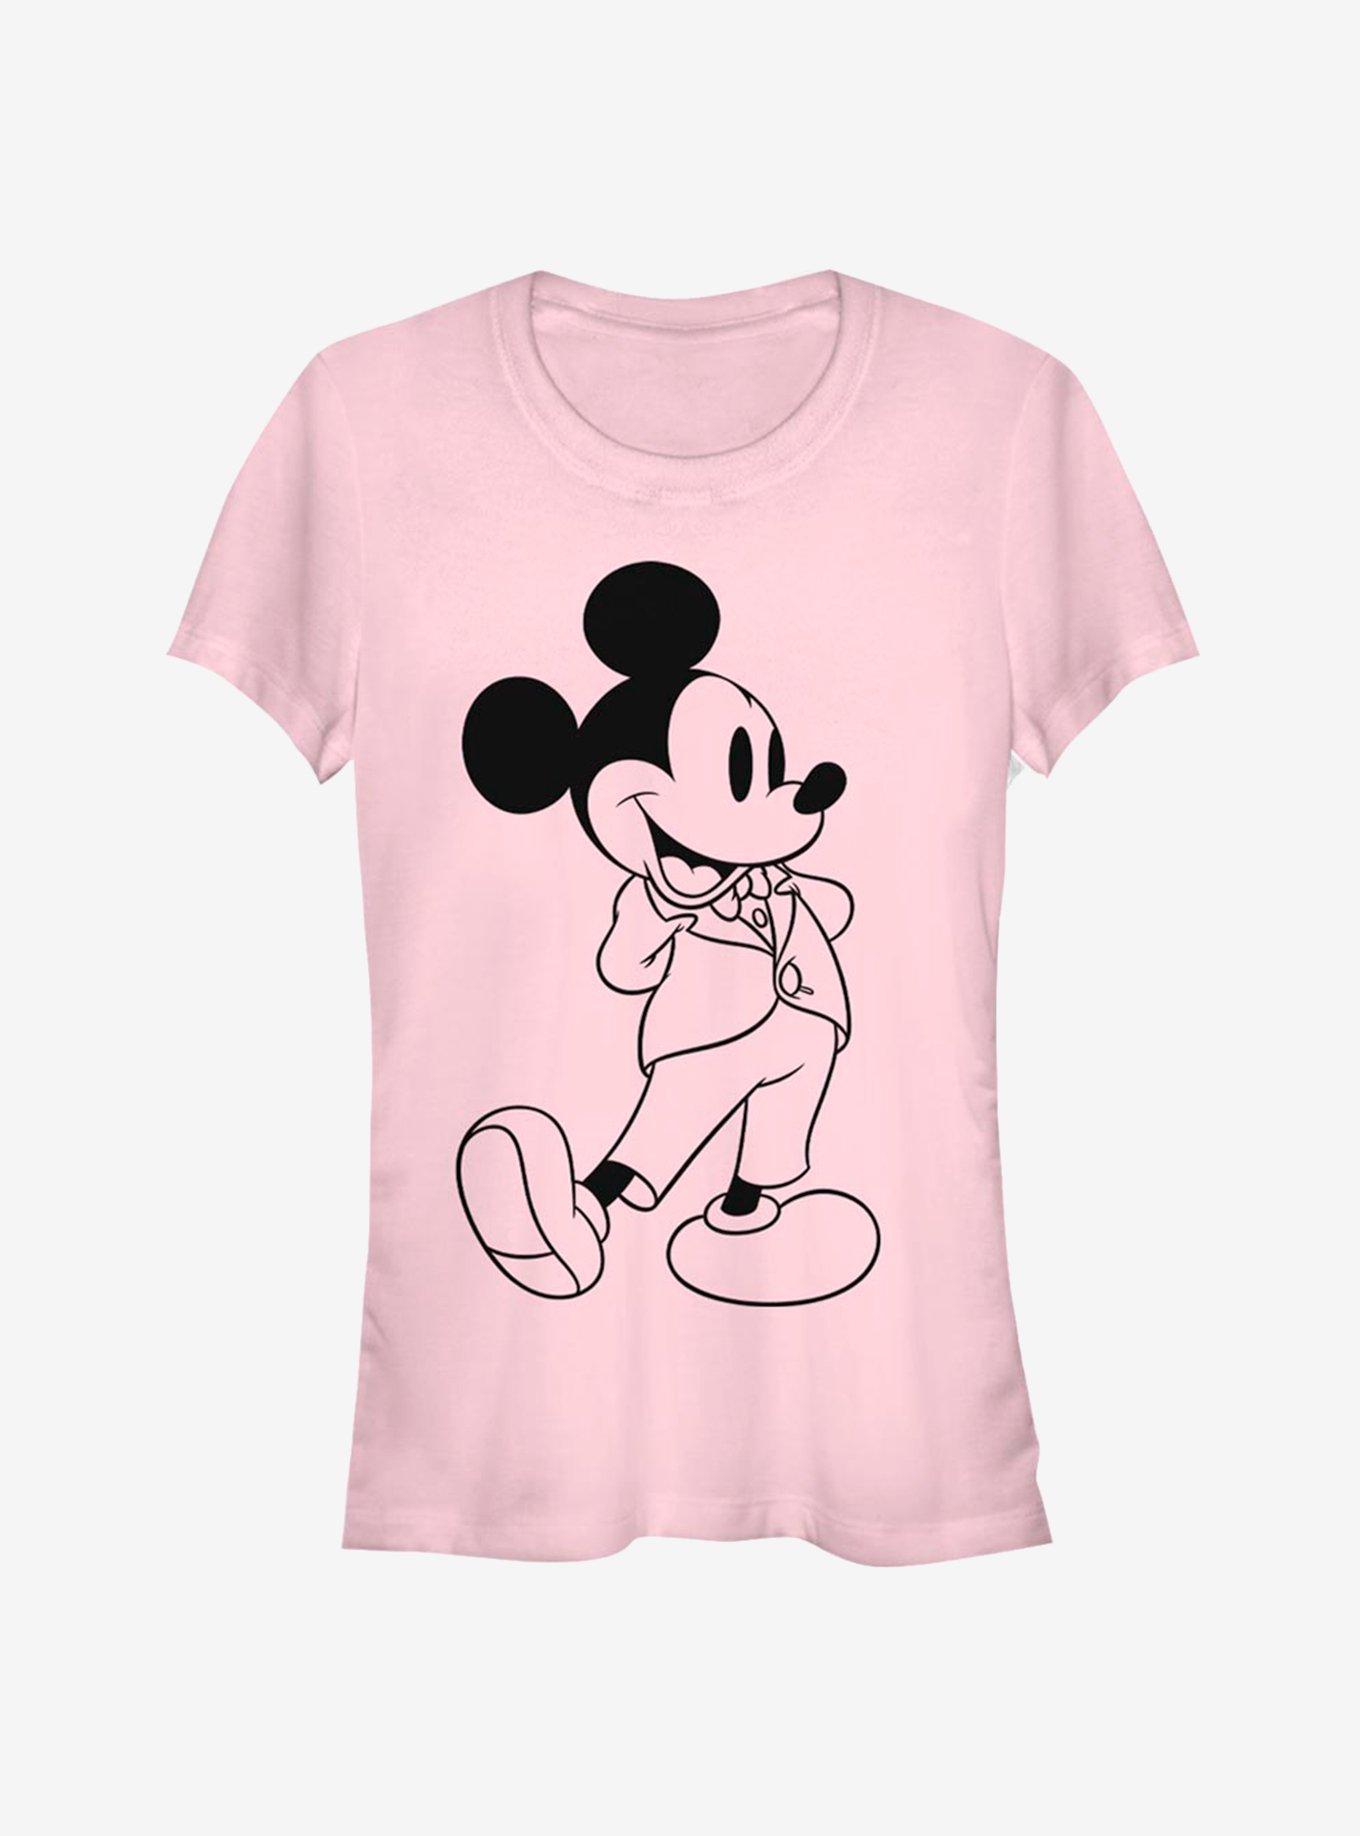 Disney Mickey Mouse Formal Classic Girls T-Shirt